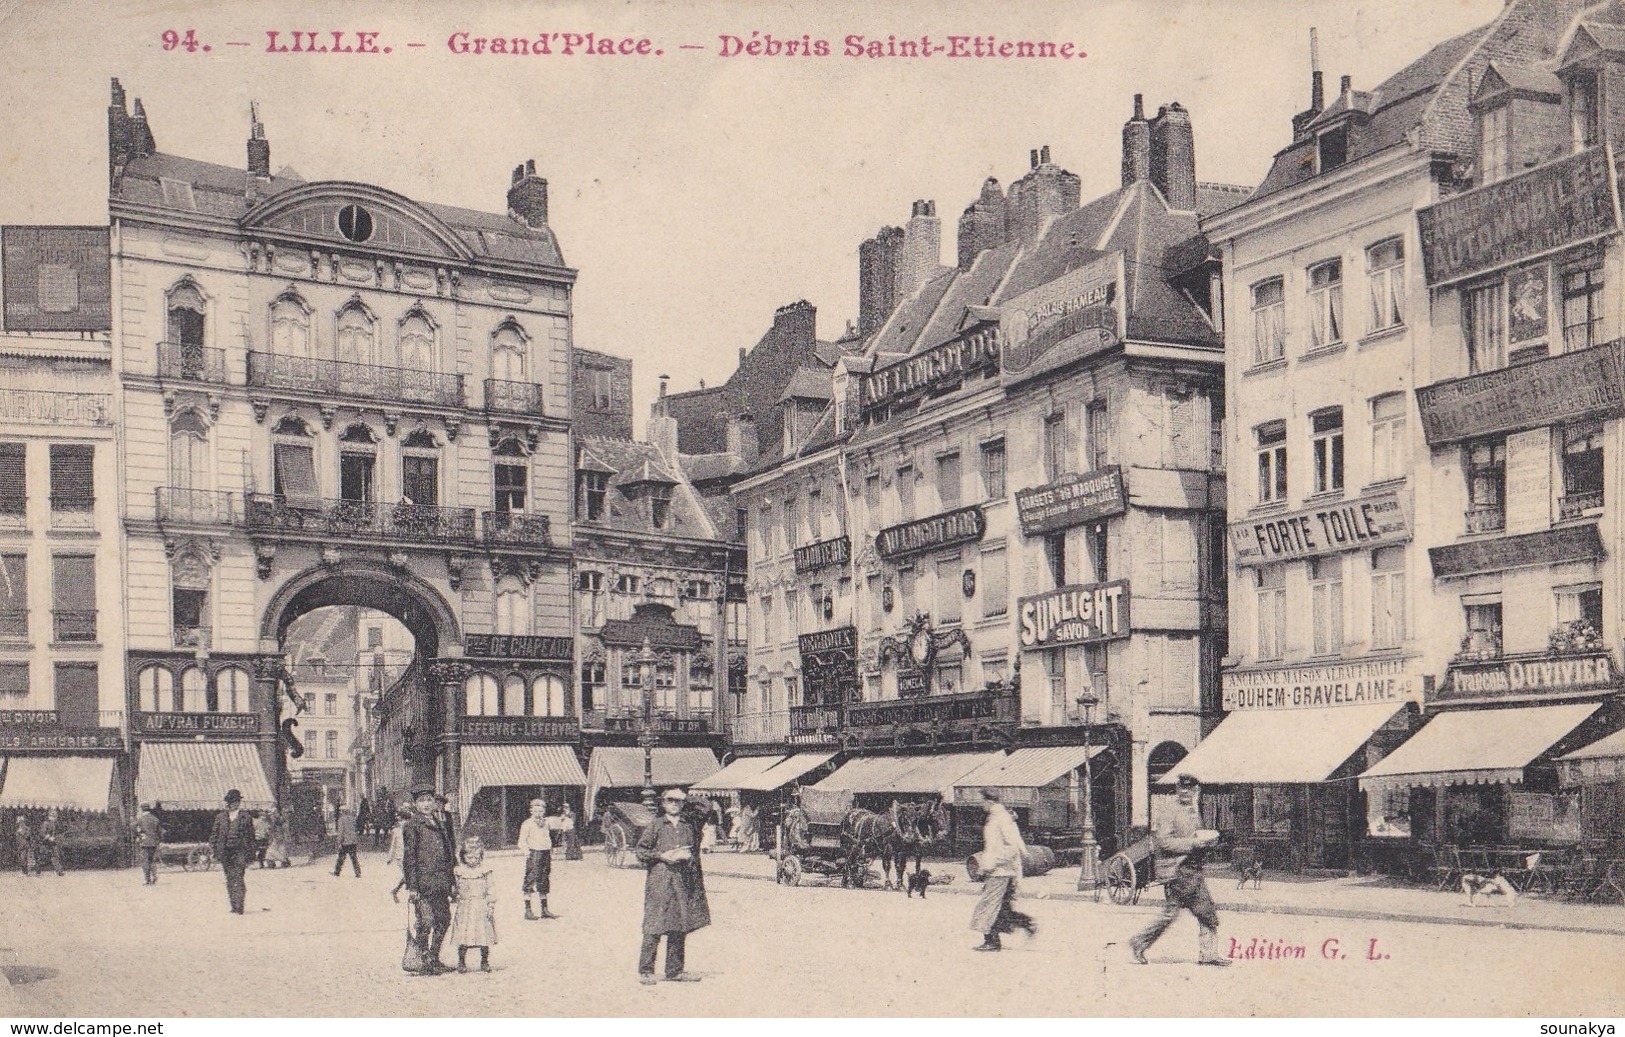 LILLE / Grand'place - Lille